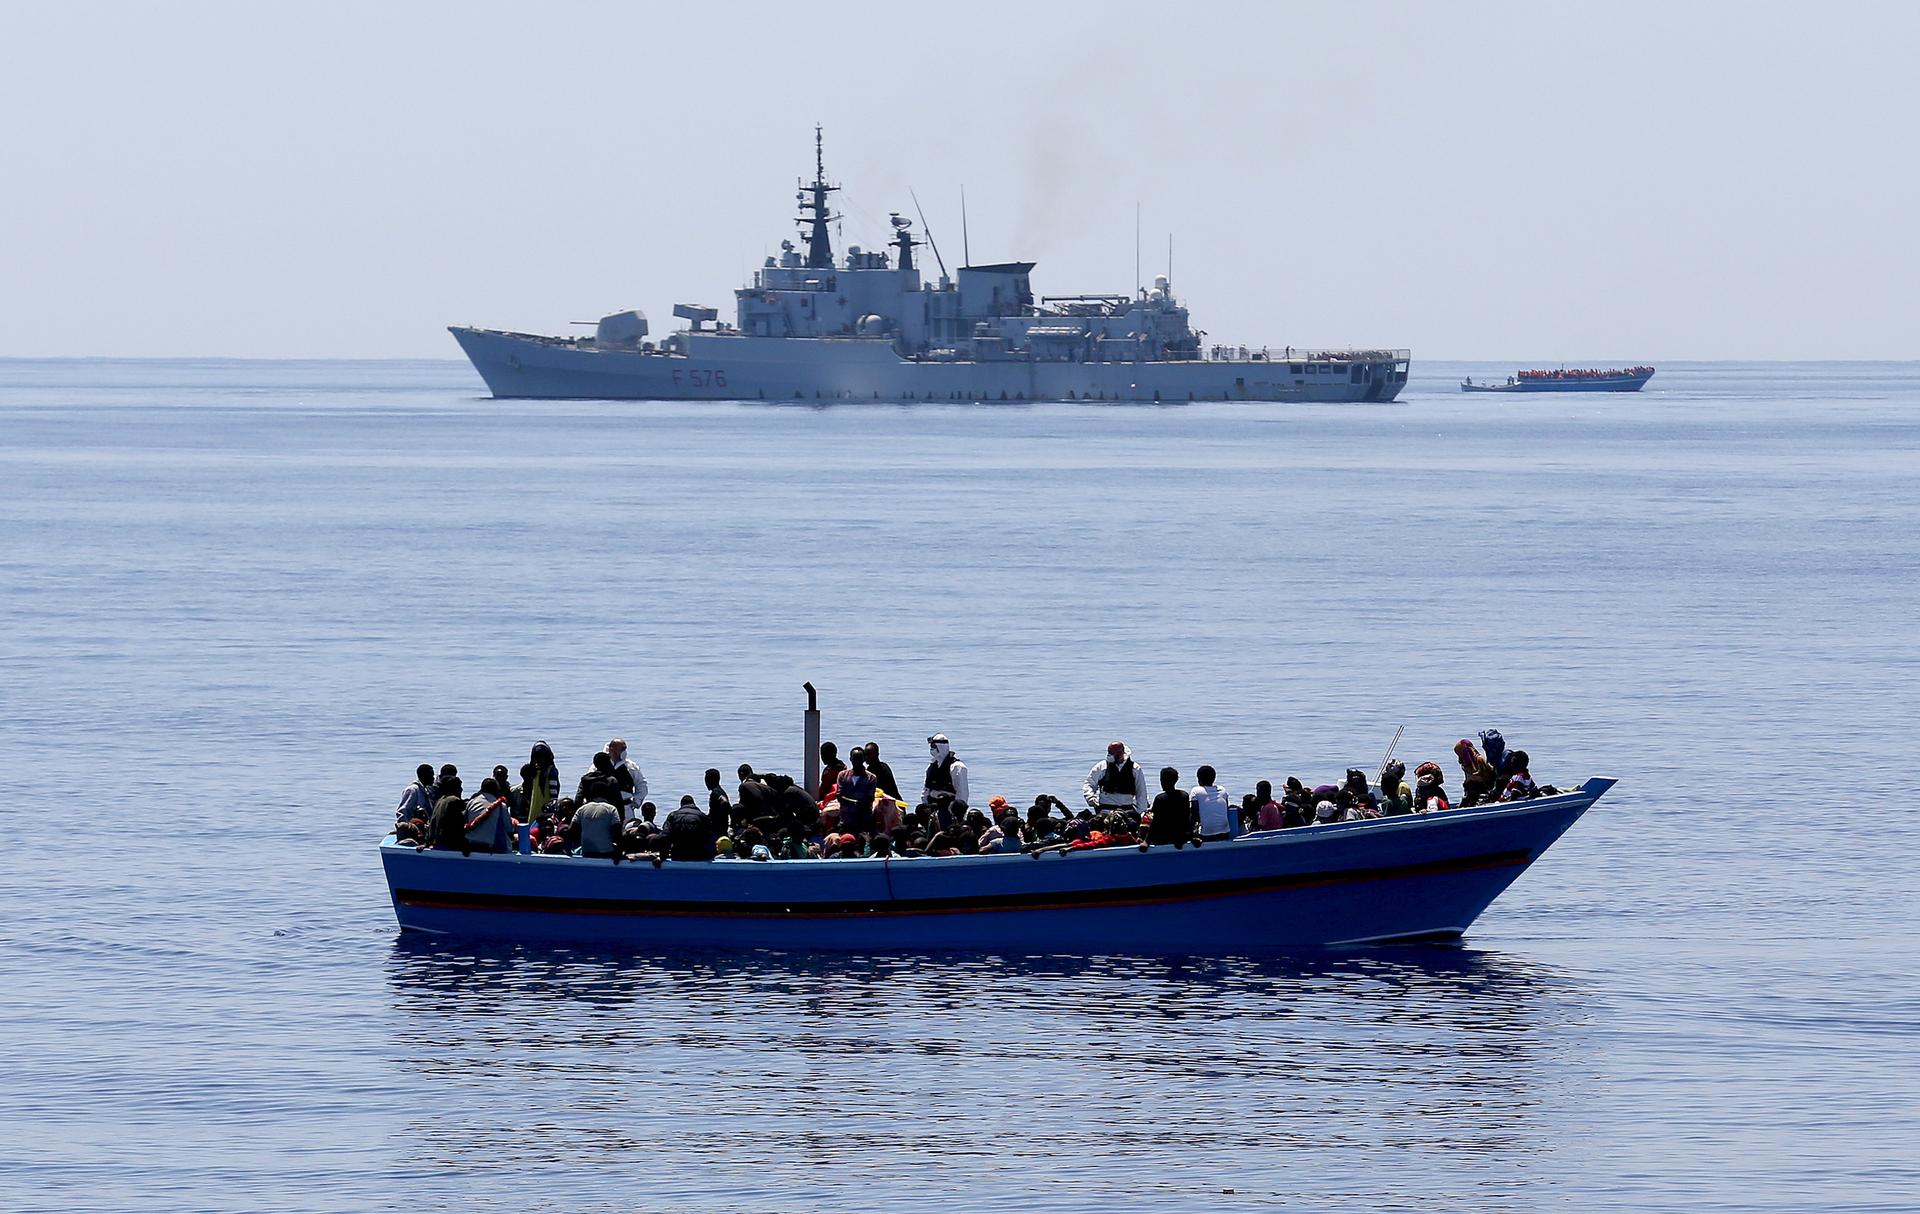 A migrant boat from North Africa off the coast of Sicily. More than 1,700 people have drowned this year attempting to make the crossing into Europe.